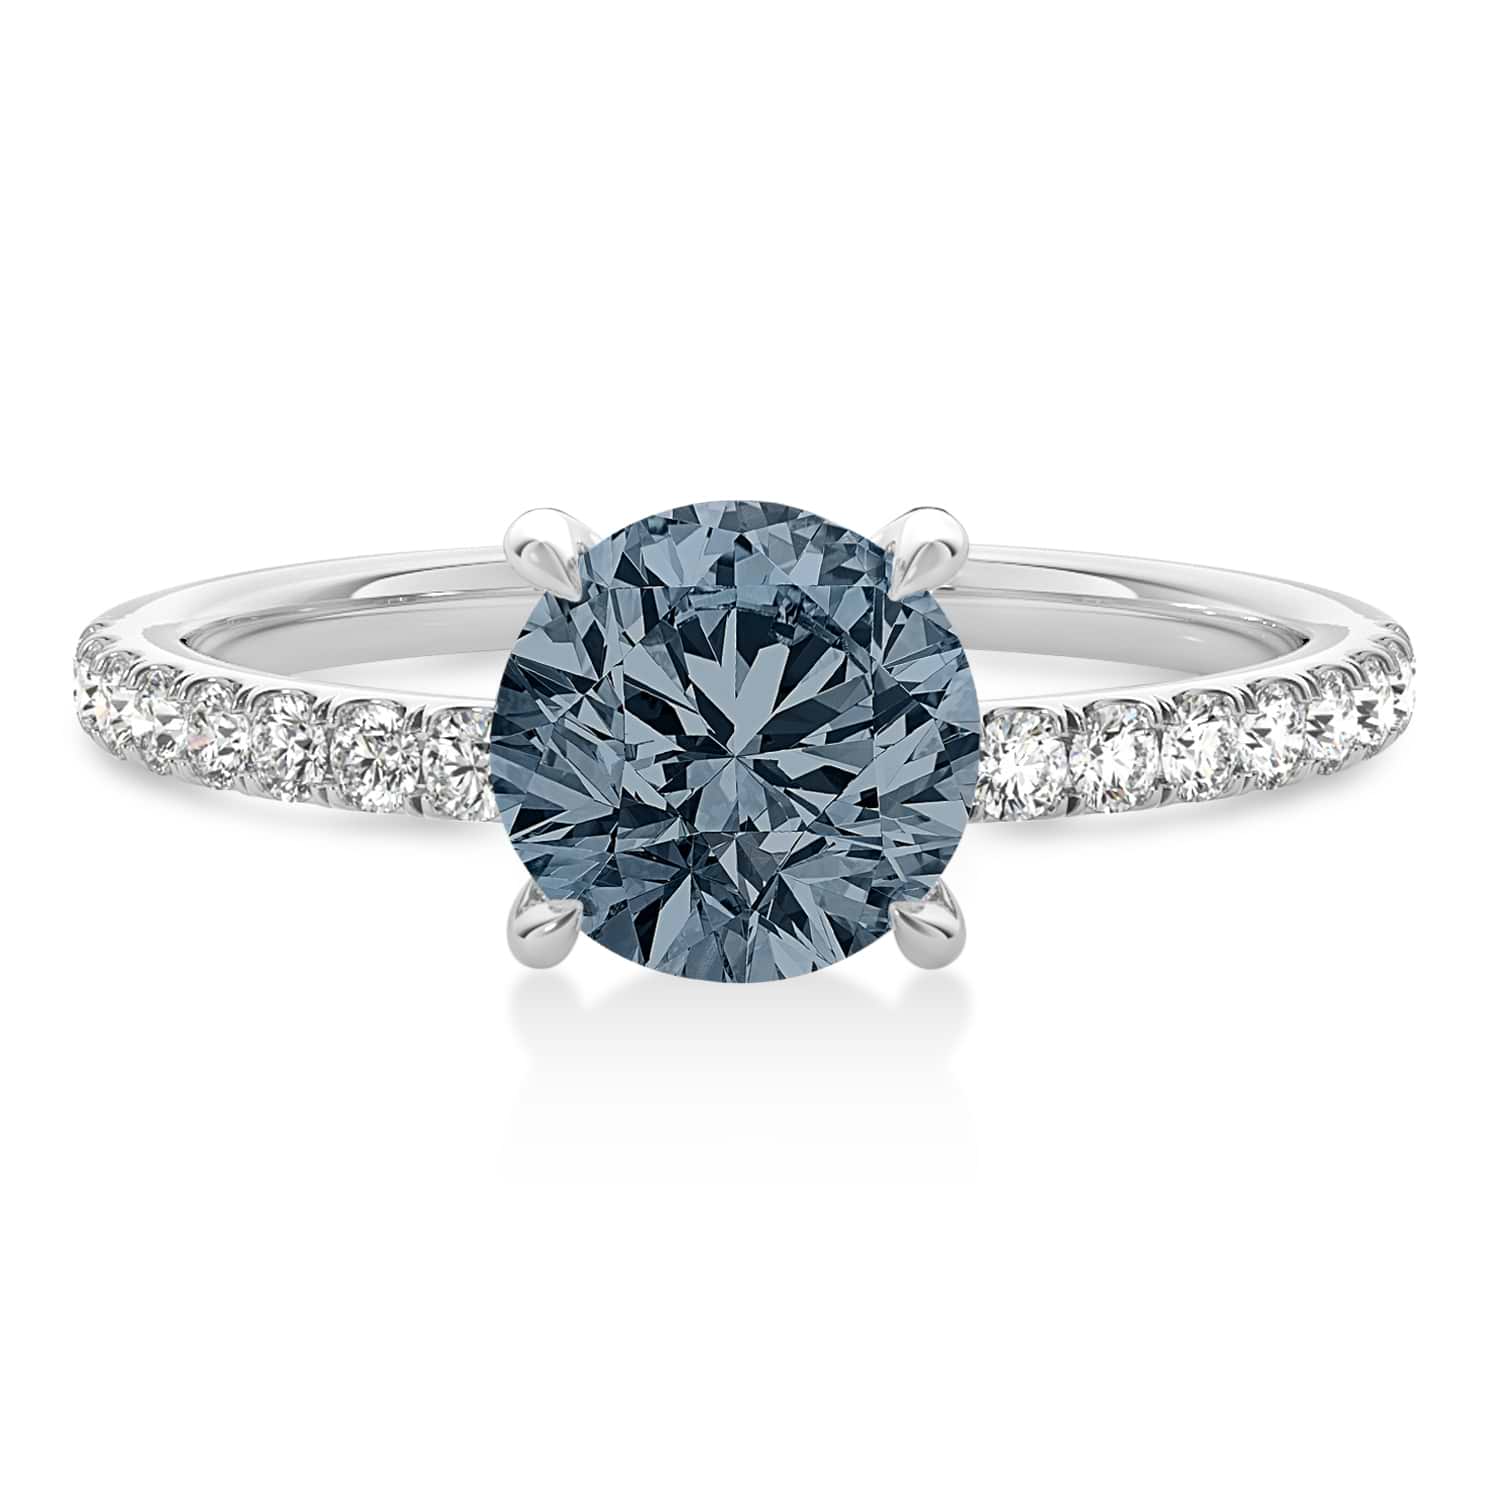 Round Gray Spinel & Diamond Single Row Hidden Halo Engagement Ring 14k White Gold (1.25ct)